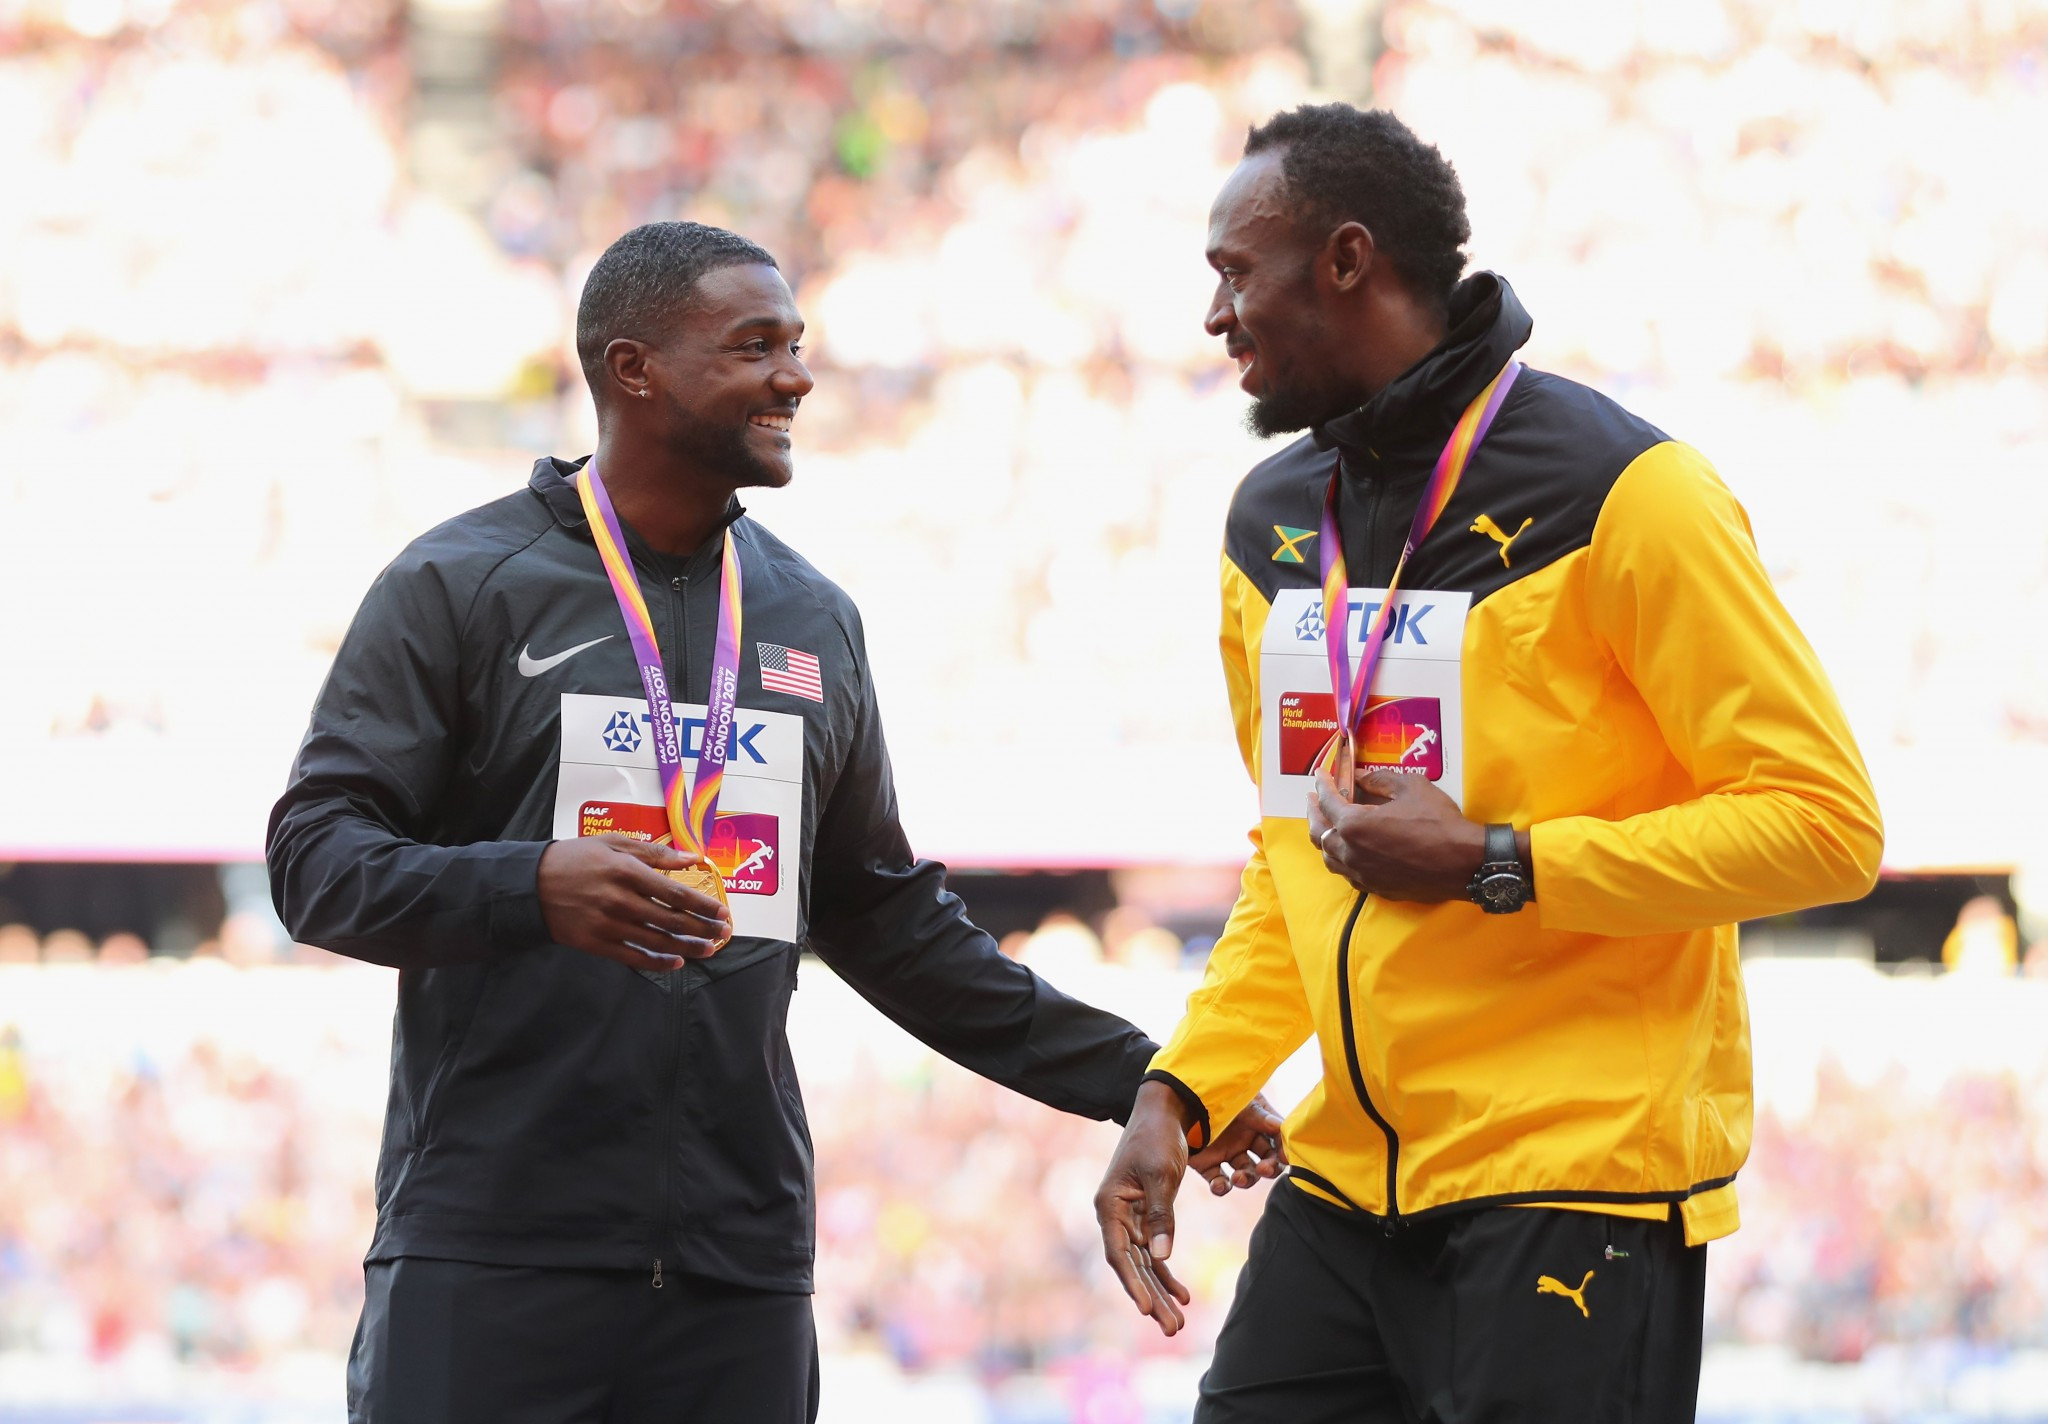 Justin Gatlin, left, gained a shock win over Christian Coleman and Usain Bolt, right ©Getty Images